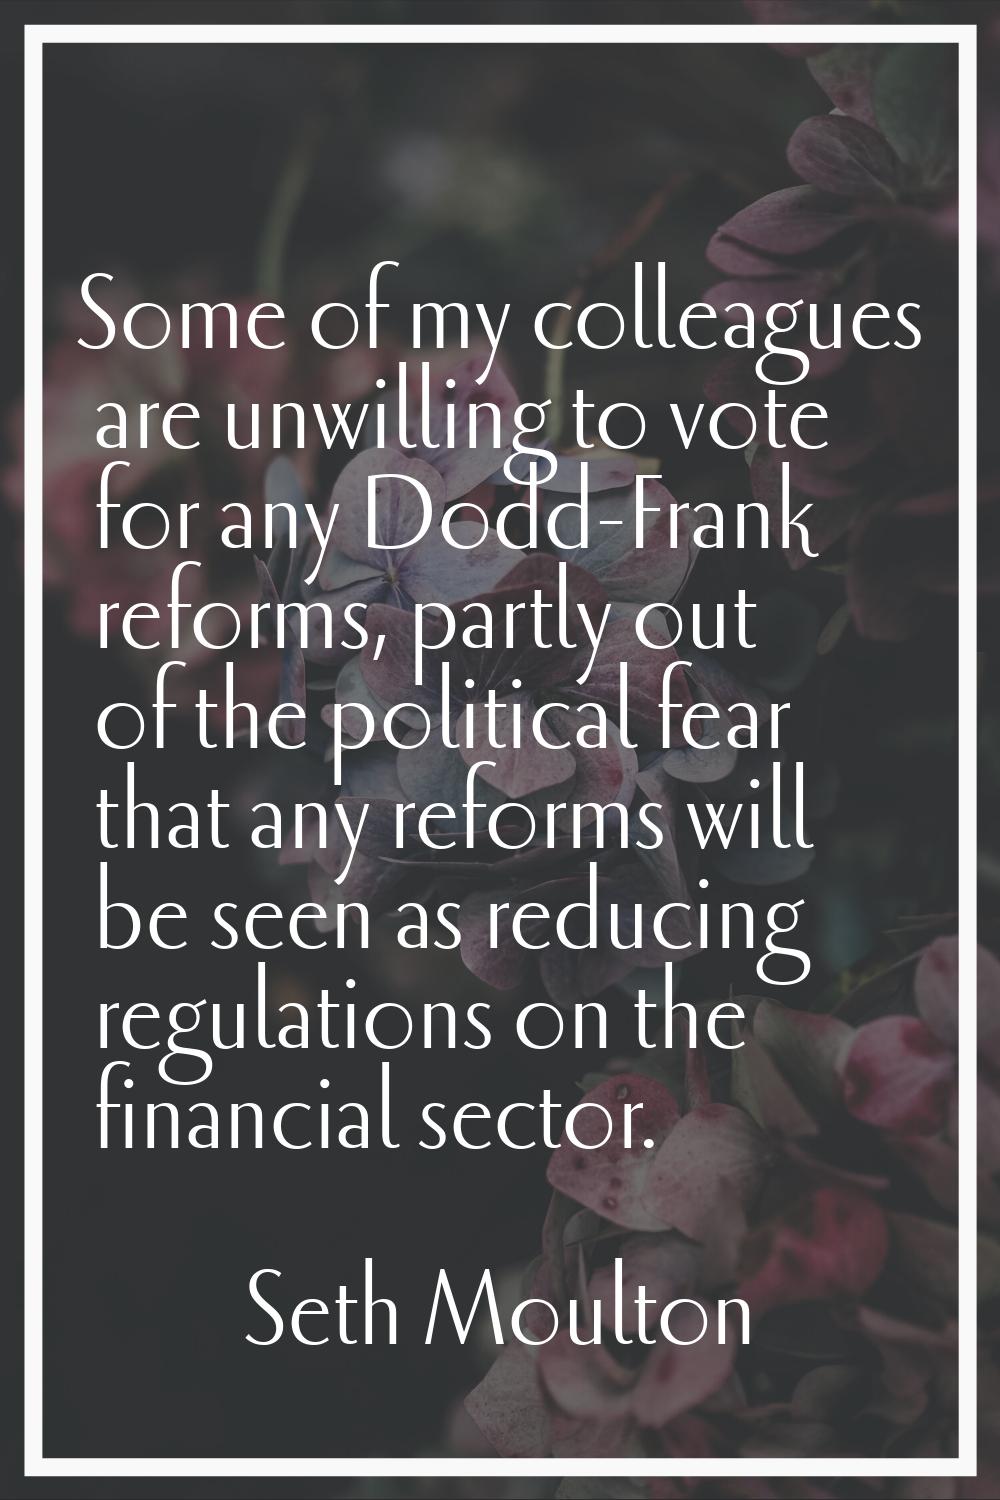 Some of my colleagues are unwilling to vote for any Dodd-Frank reforms, partly out of the political